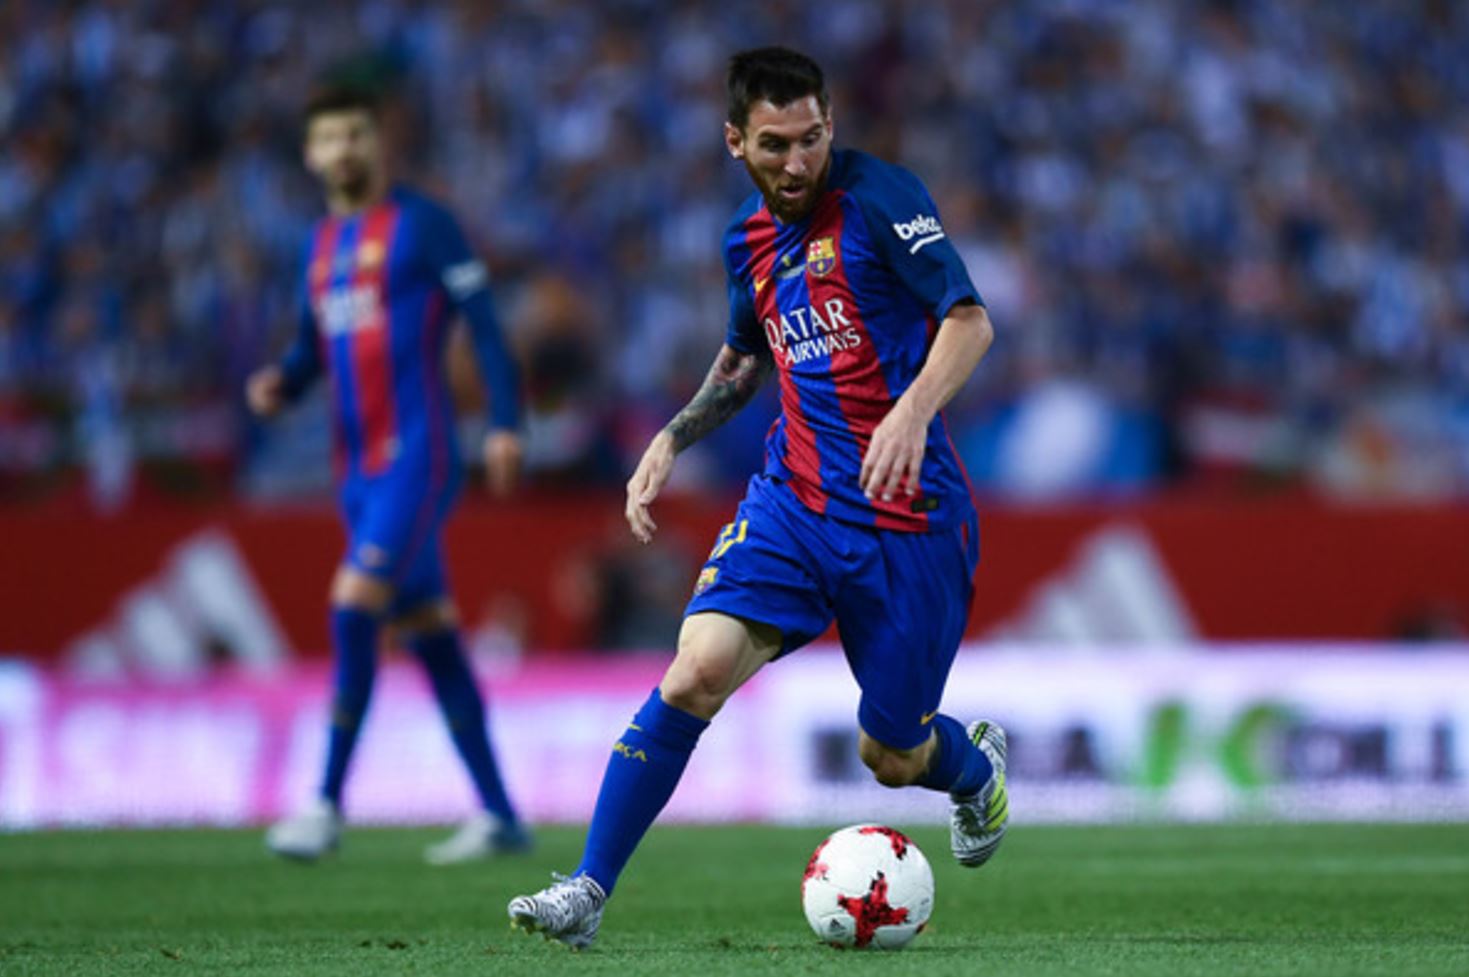 What Nemeziz Boot is Lionel Messi Actually Wearing? - Soccer Cleats 101